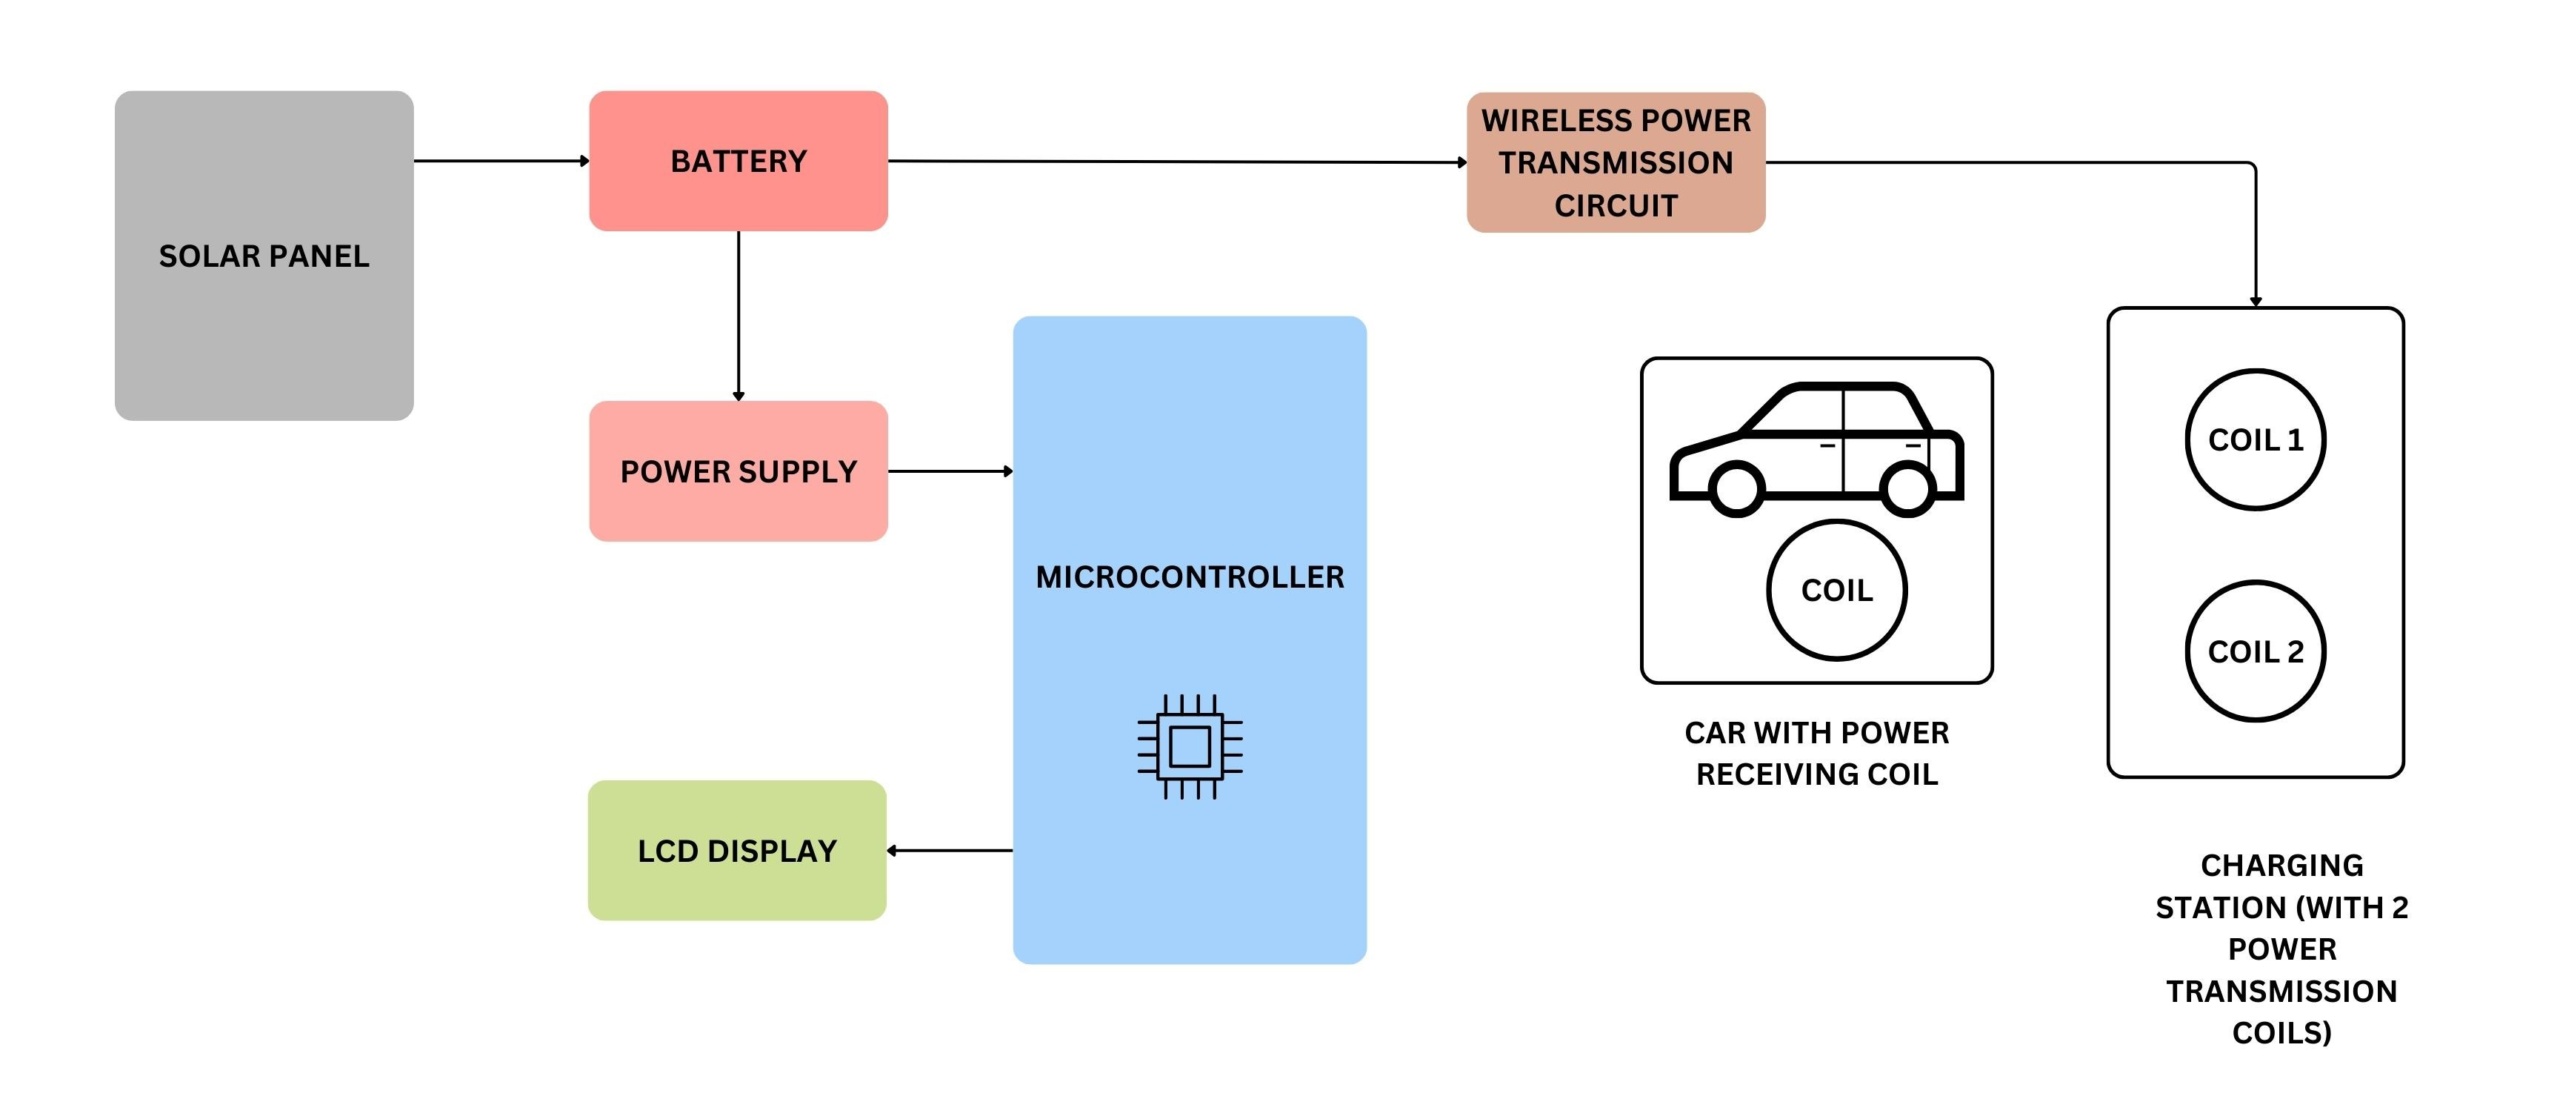 WIRELESS ENERGY TRASNFER FOR ELECTRIC VEHICLE (CHARGING STATION) BLOCK DIAGRAMM